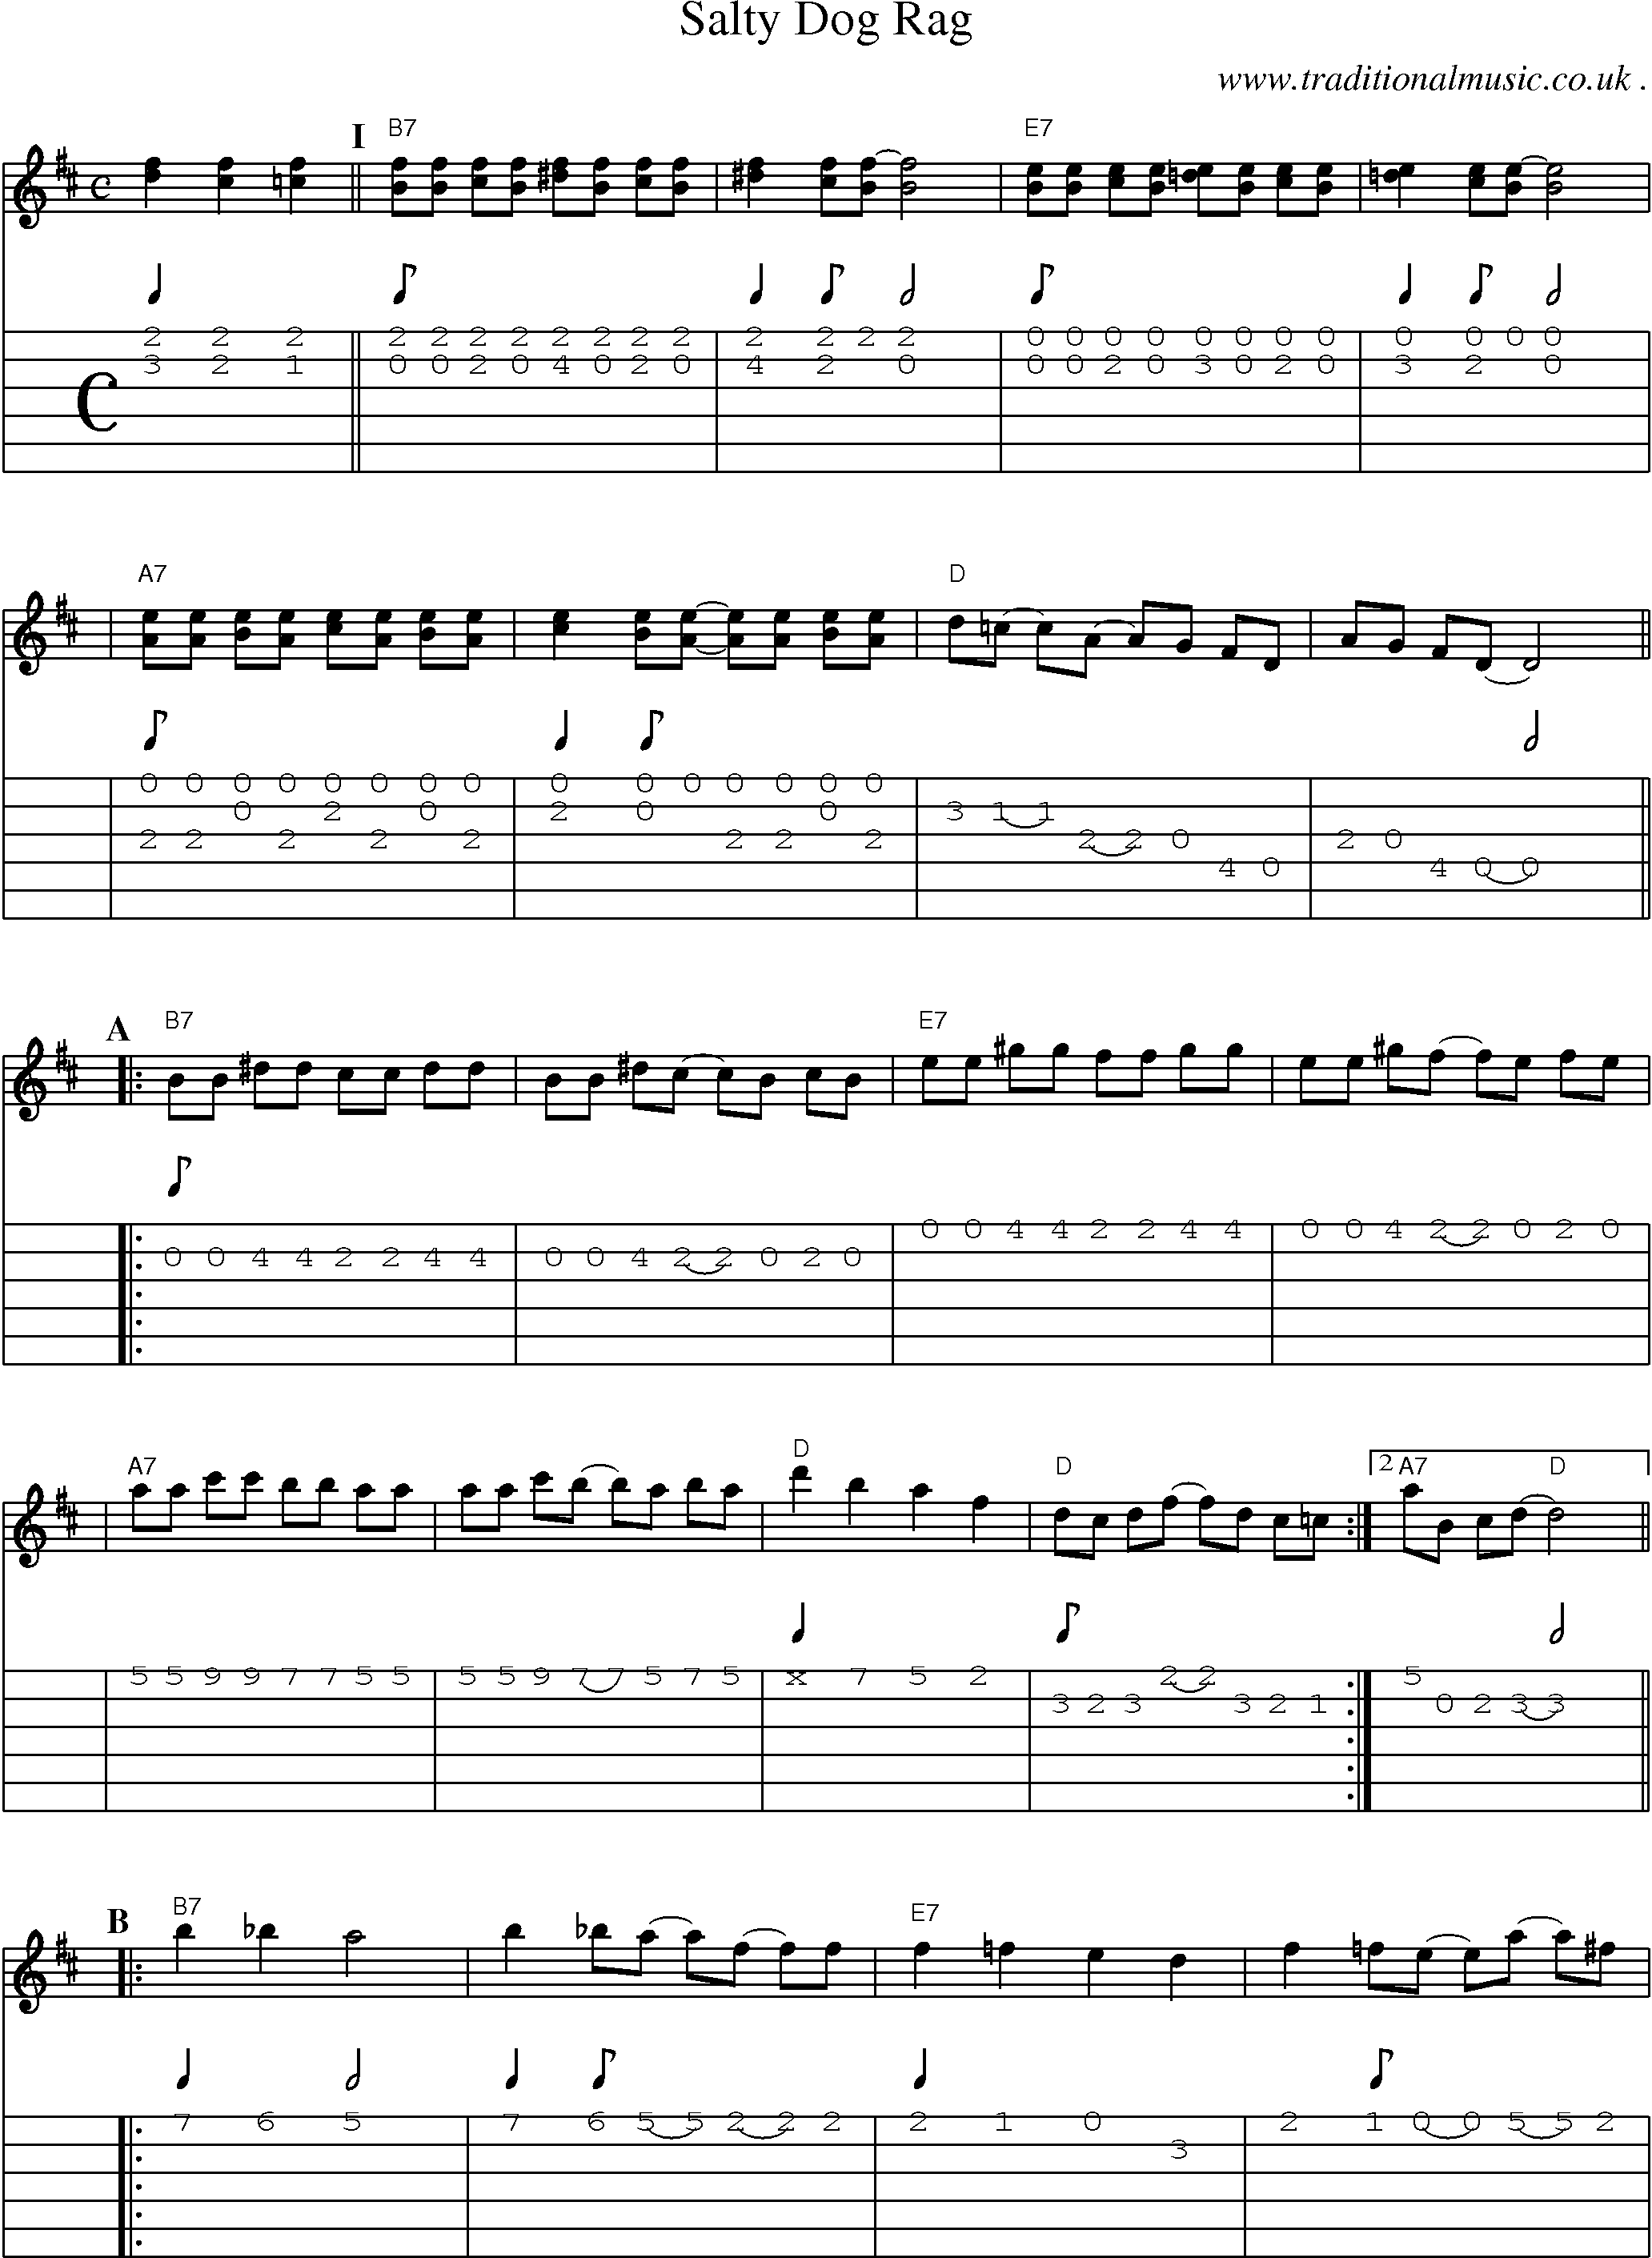 Sheet-Music and Guitar Tabs for Salty Dog Rag